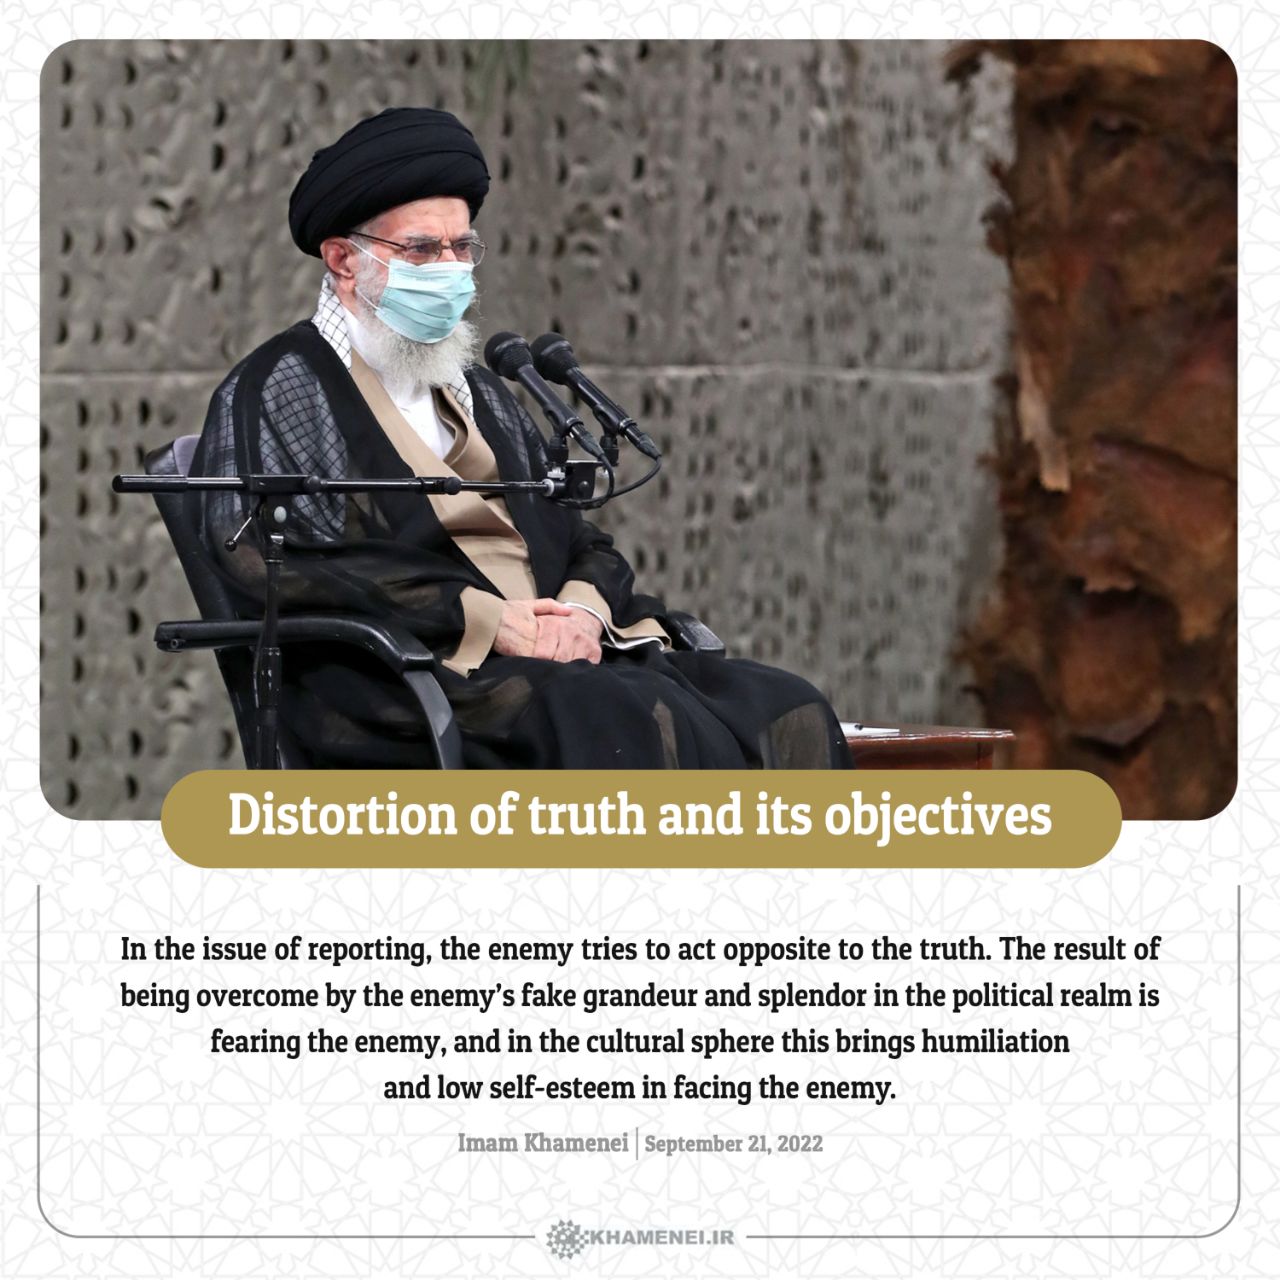 Distortion of truth and its objectives